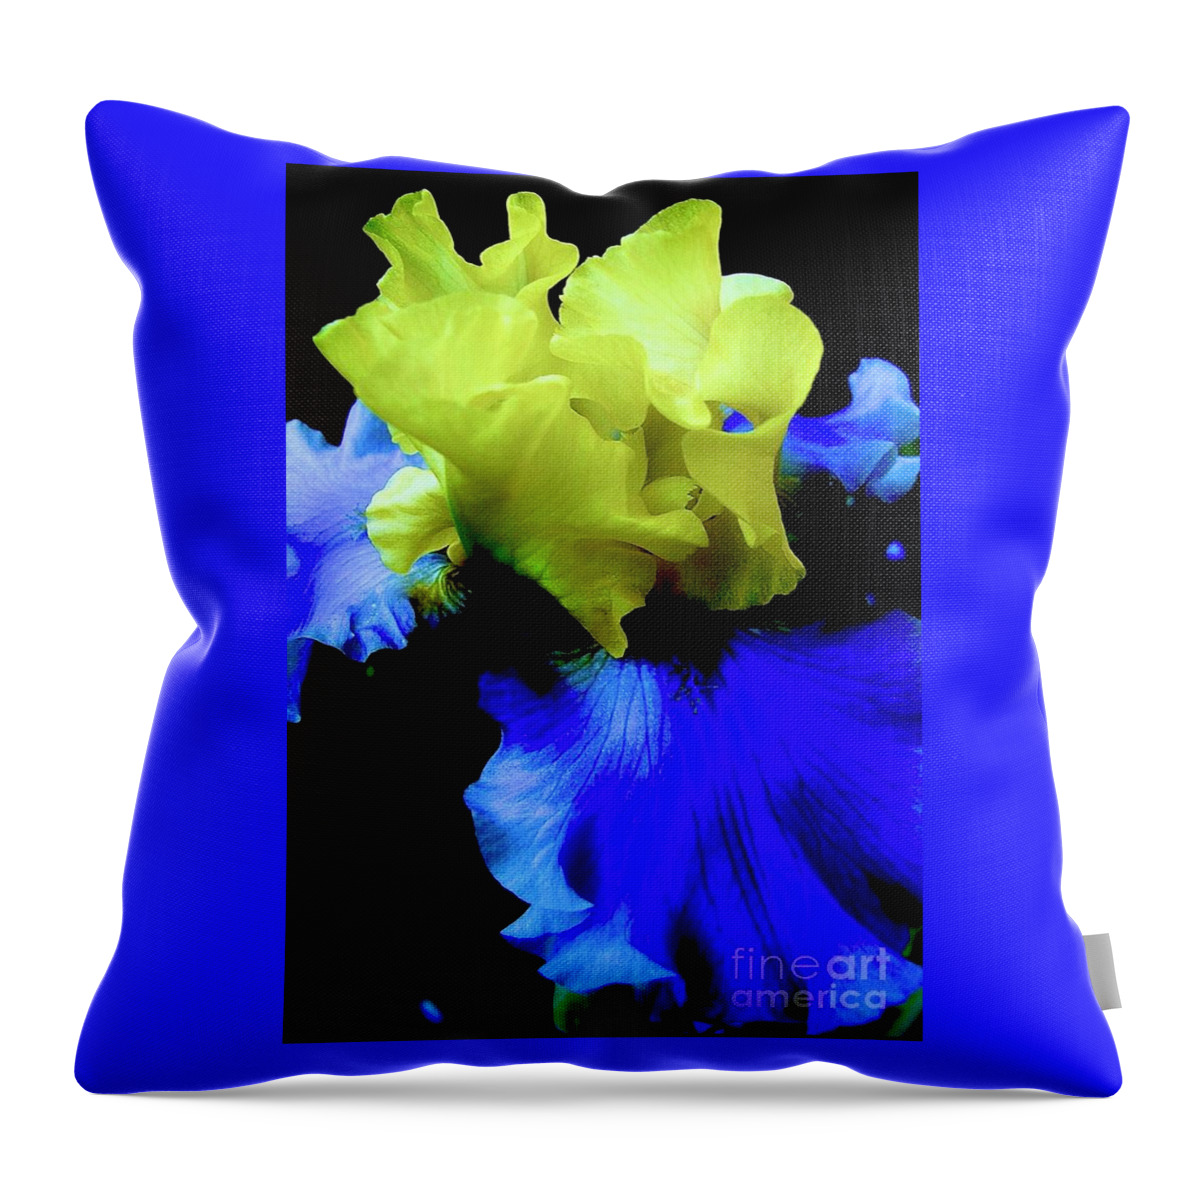 Bearded Iris Throw Pillow featuring the digital art Maize N Blue by Tammy Keyes